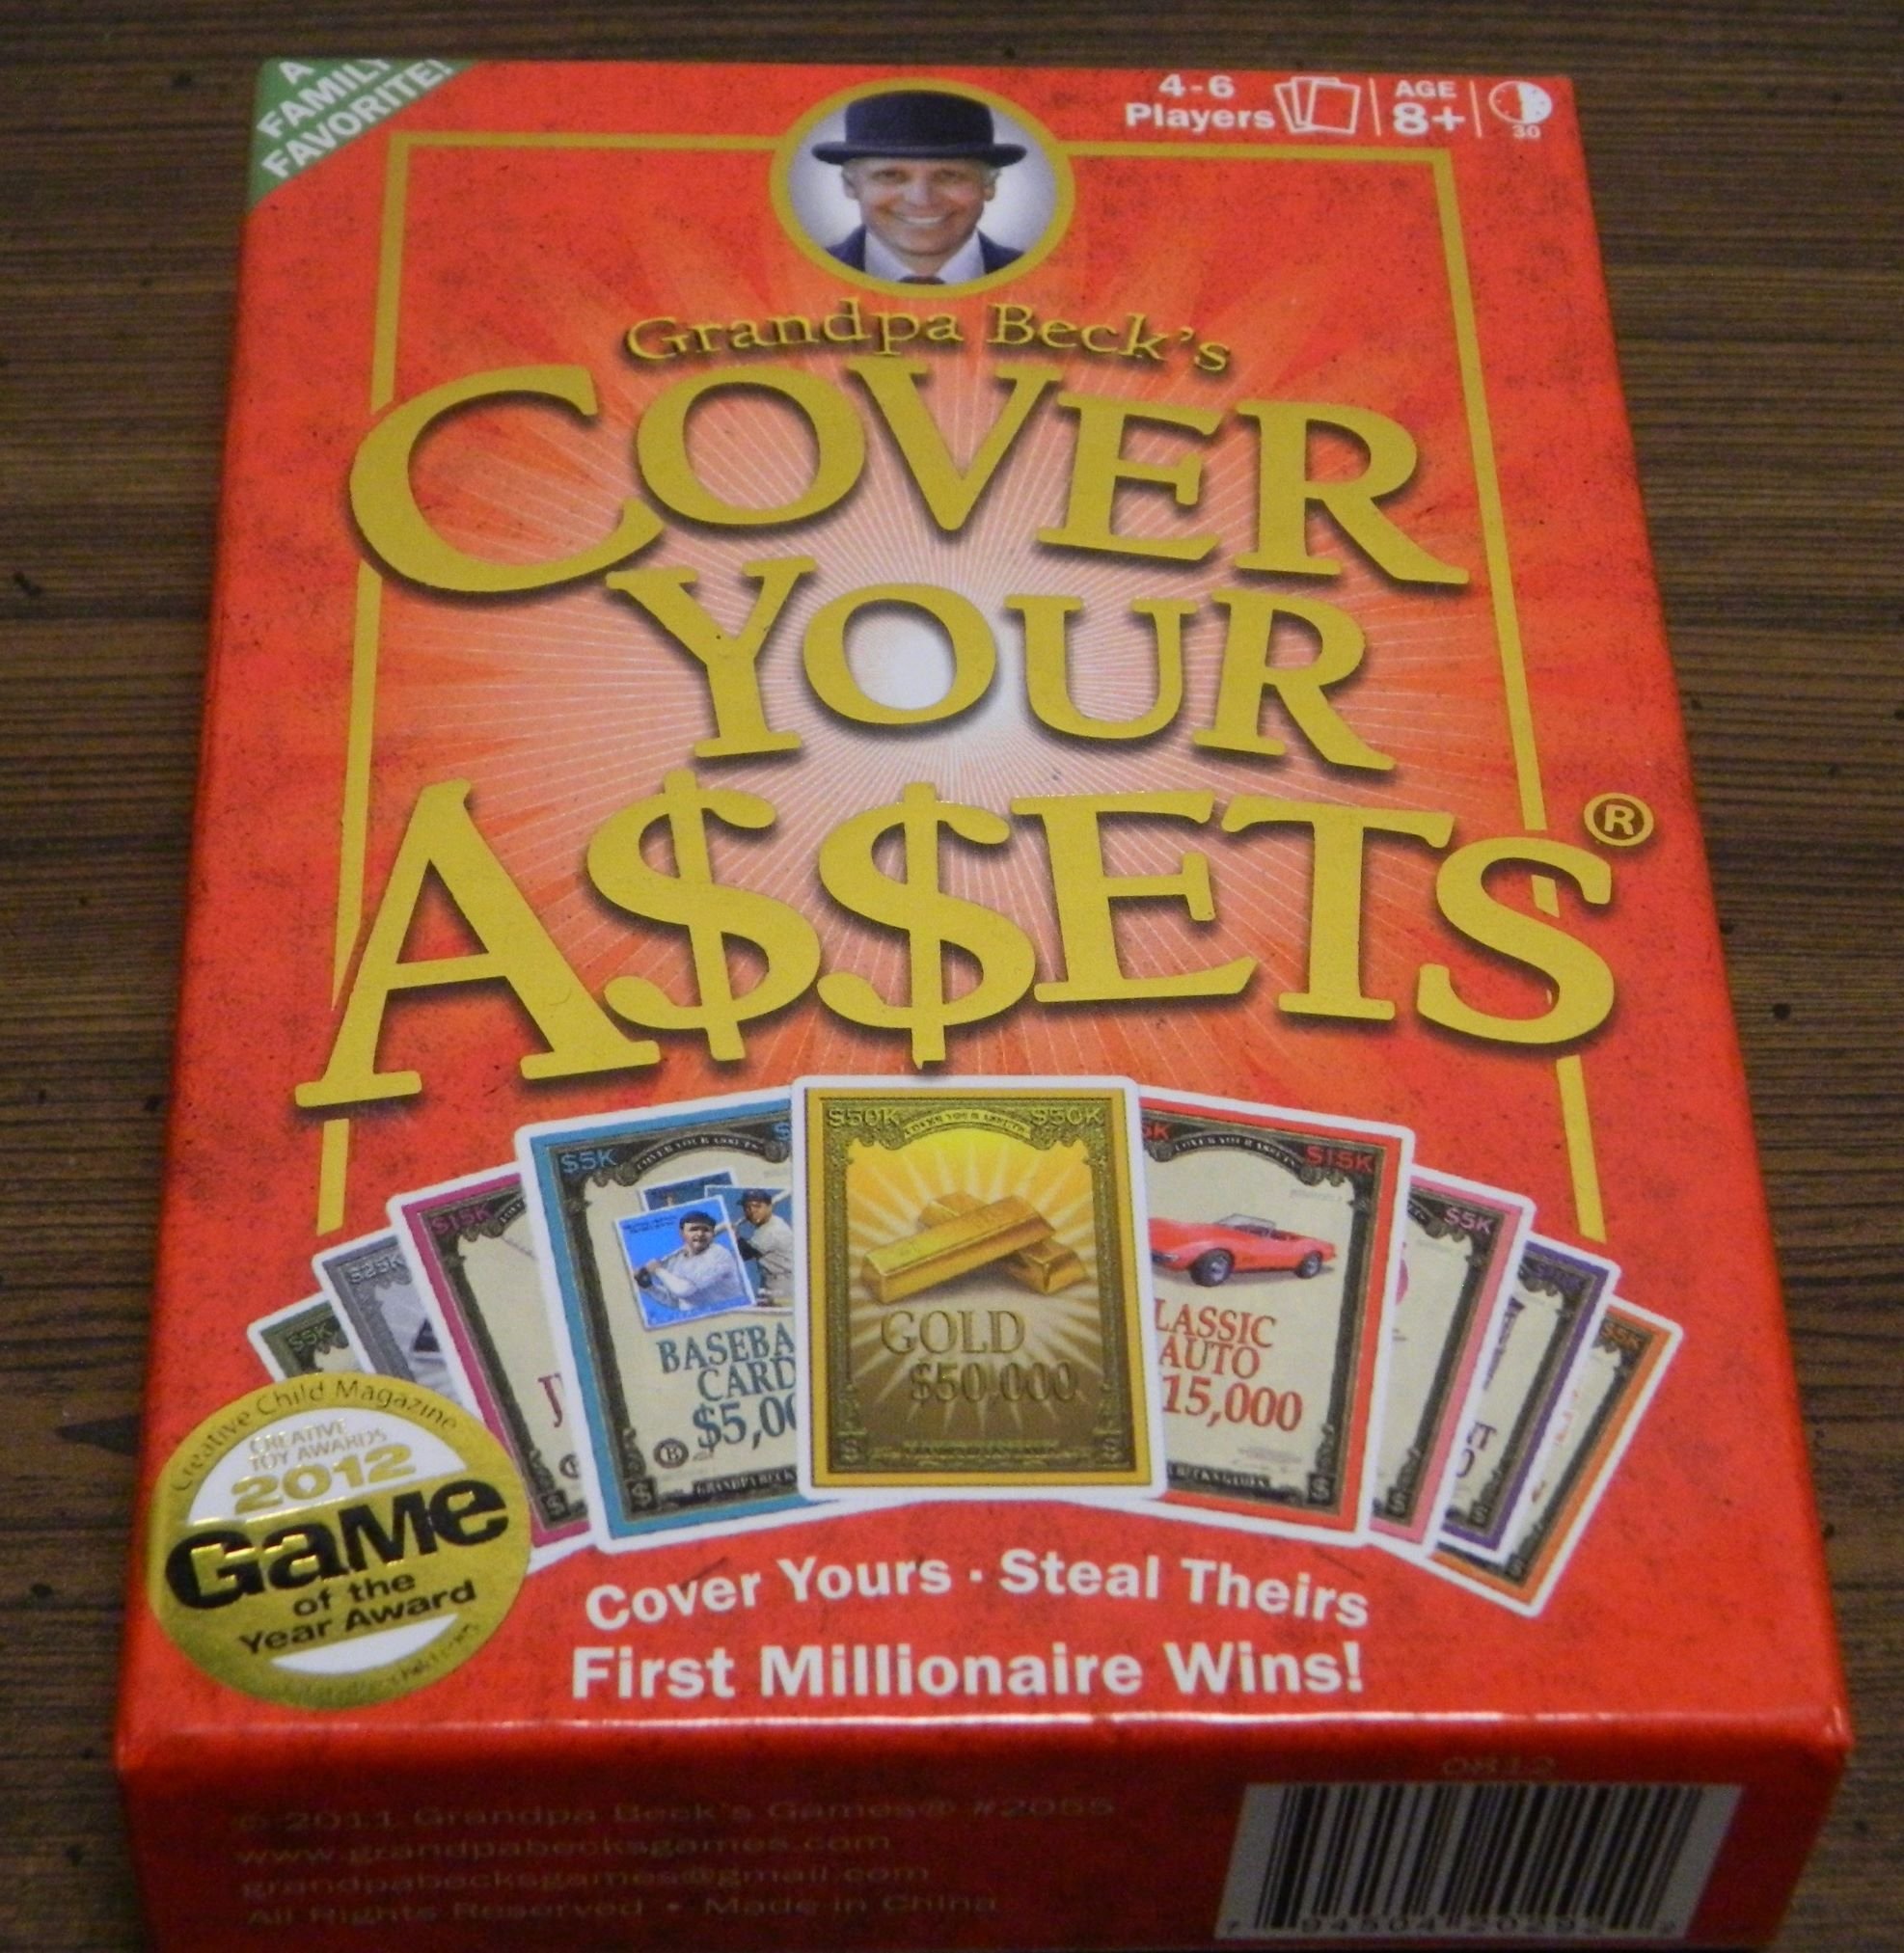 Box for Cover Your Assets